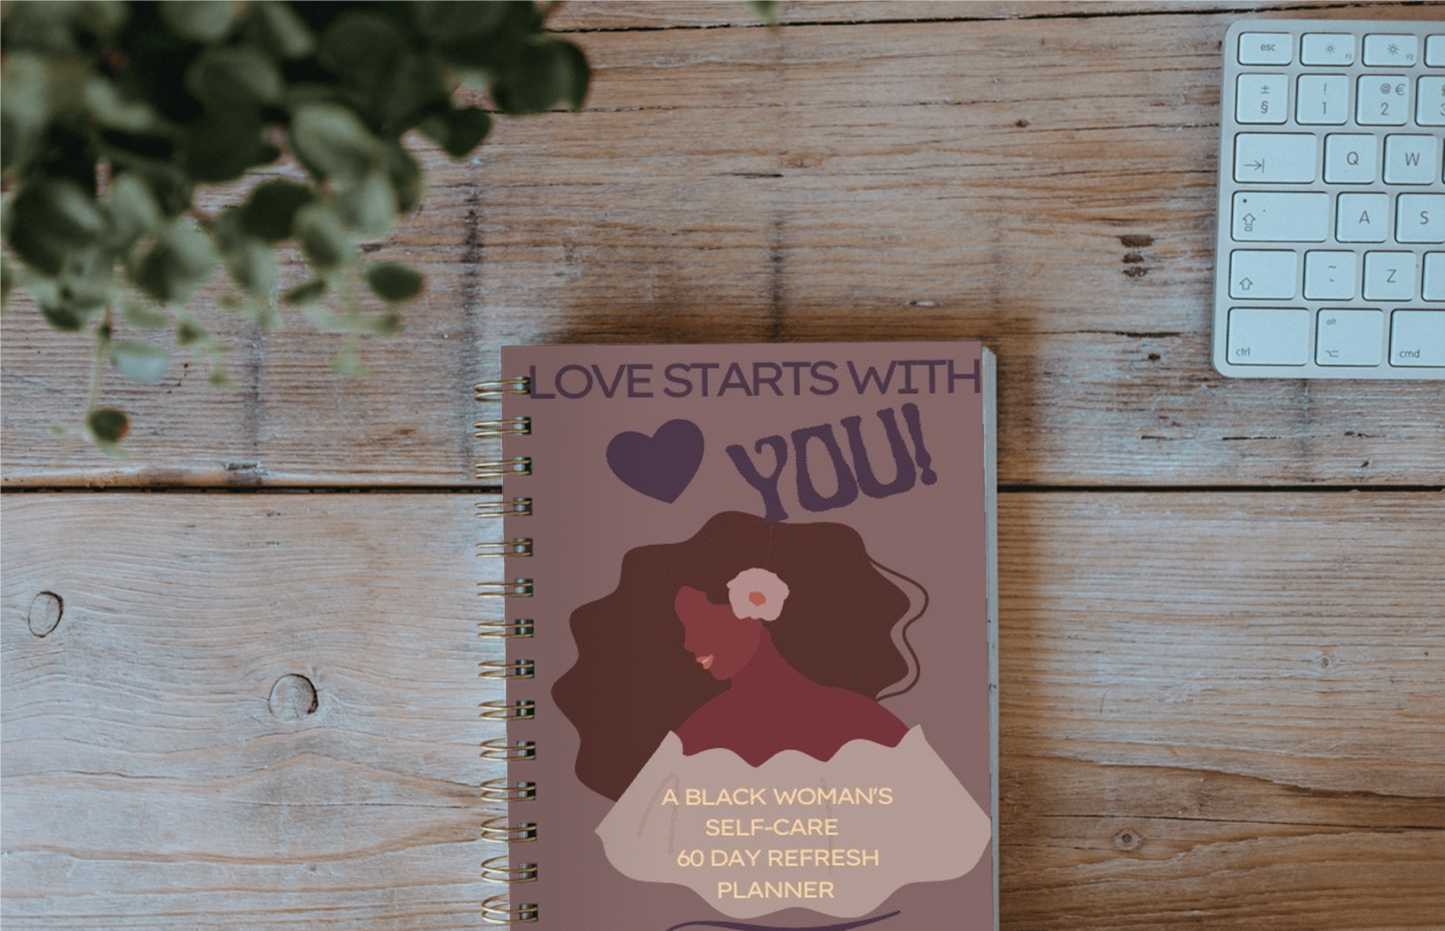 60 Day Refresh Planner! Love Starts With You. (Flow)